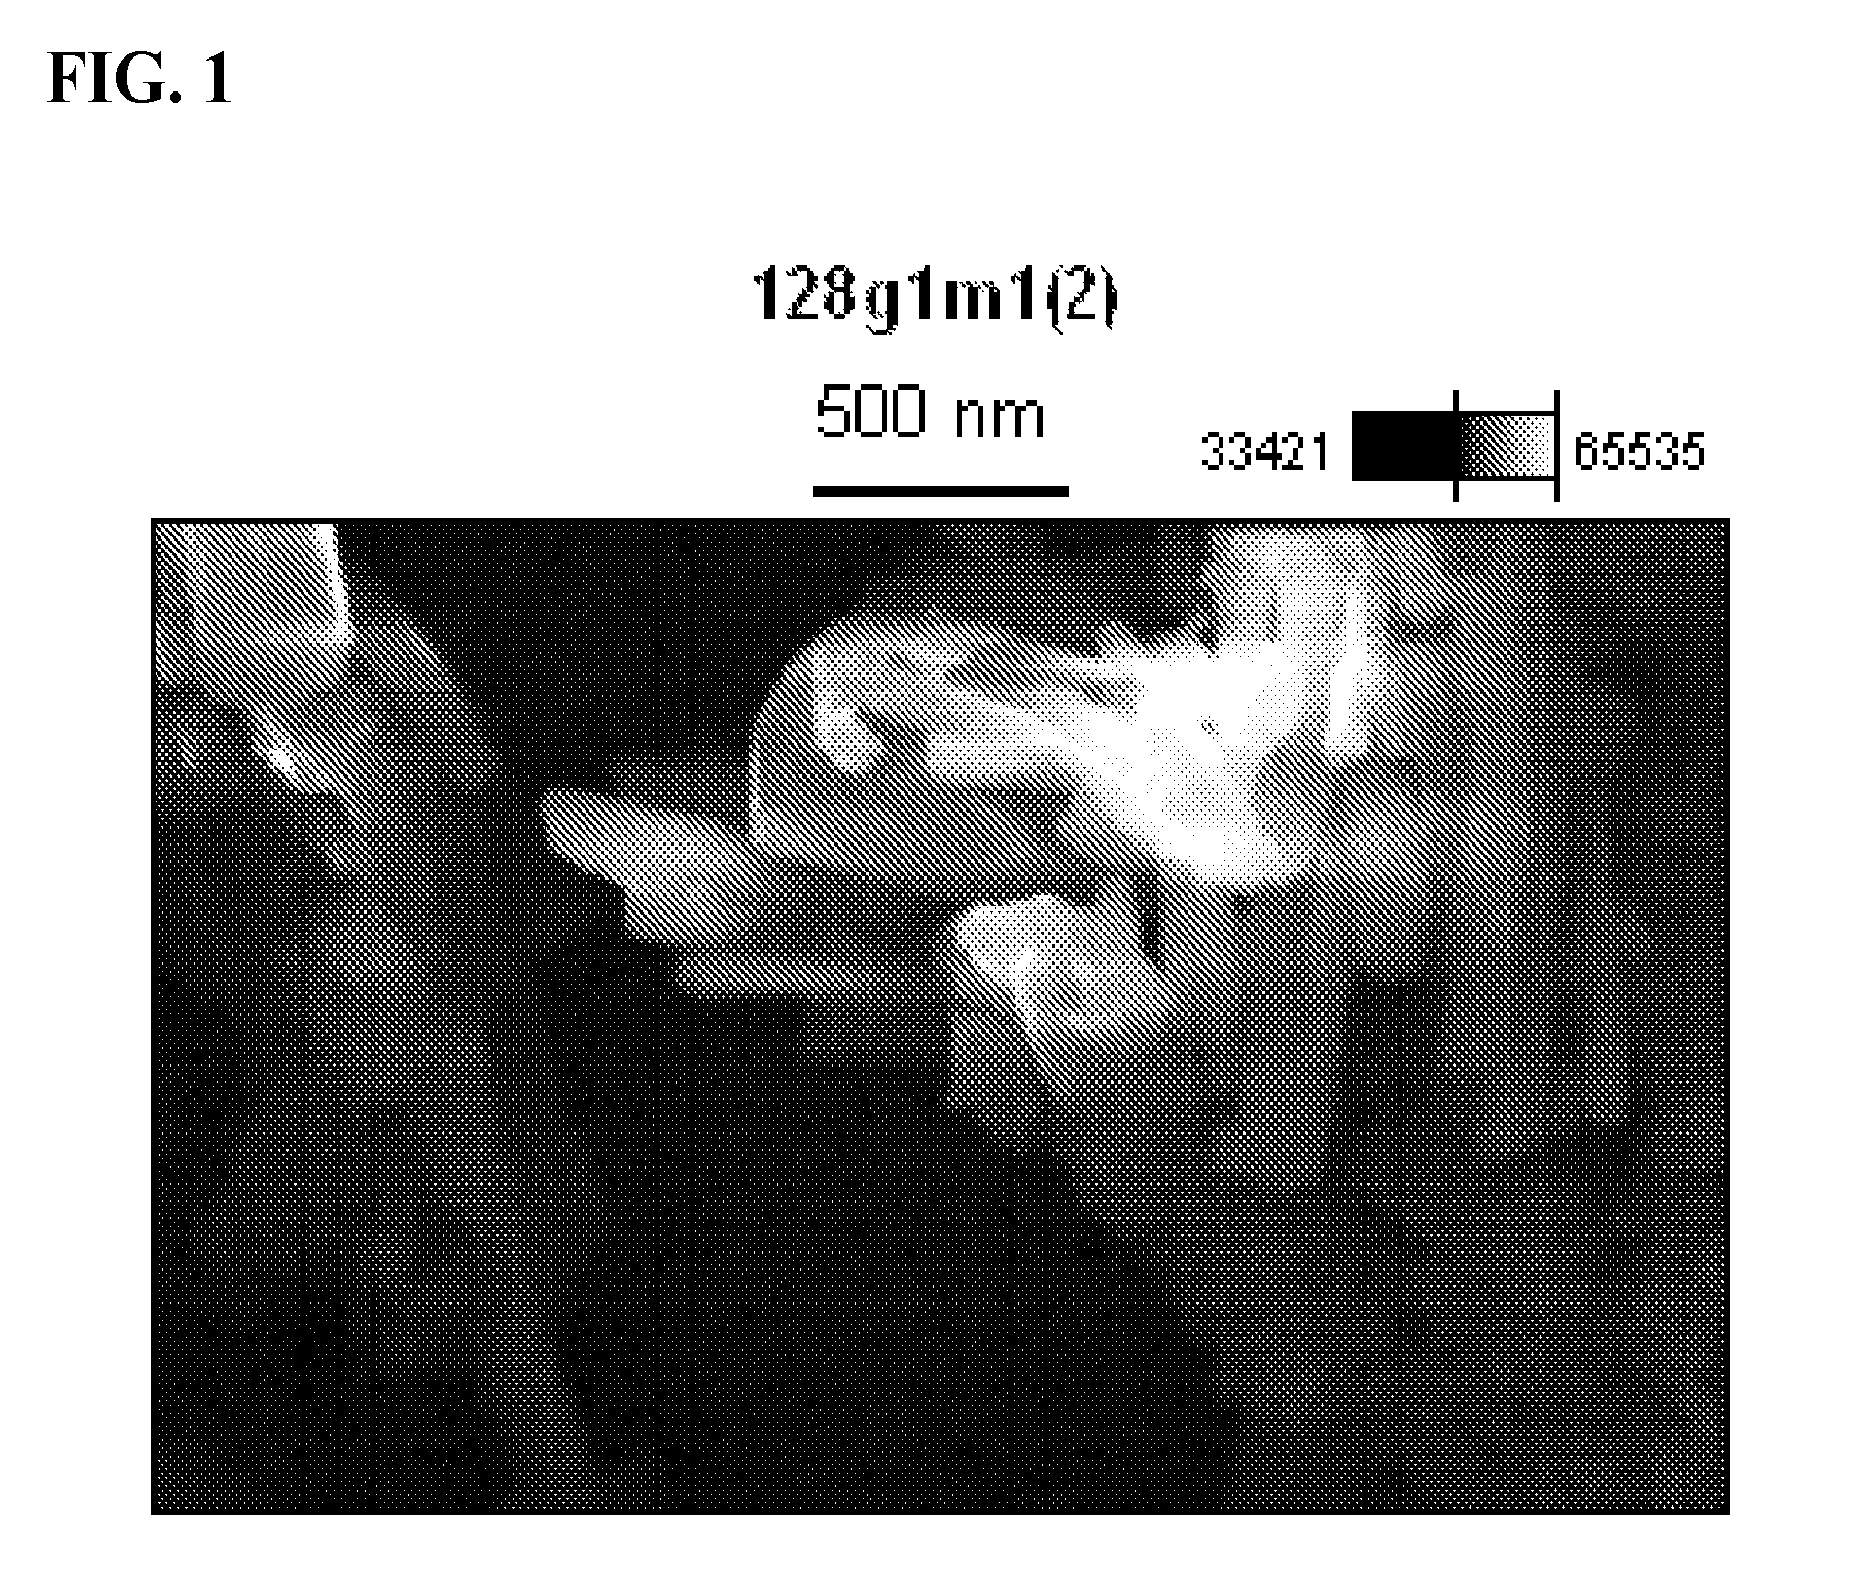 Chlorobis copper (I) complex compositions and methods of manufacture and use